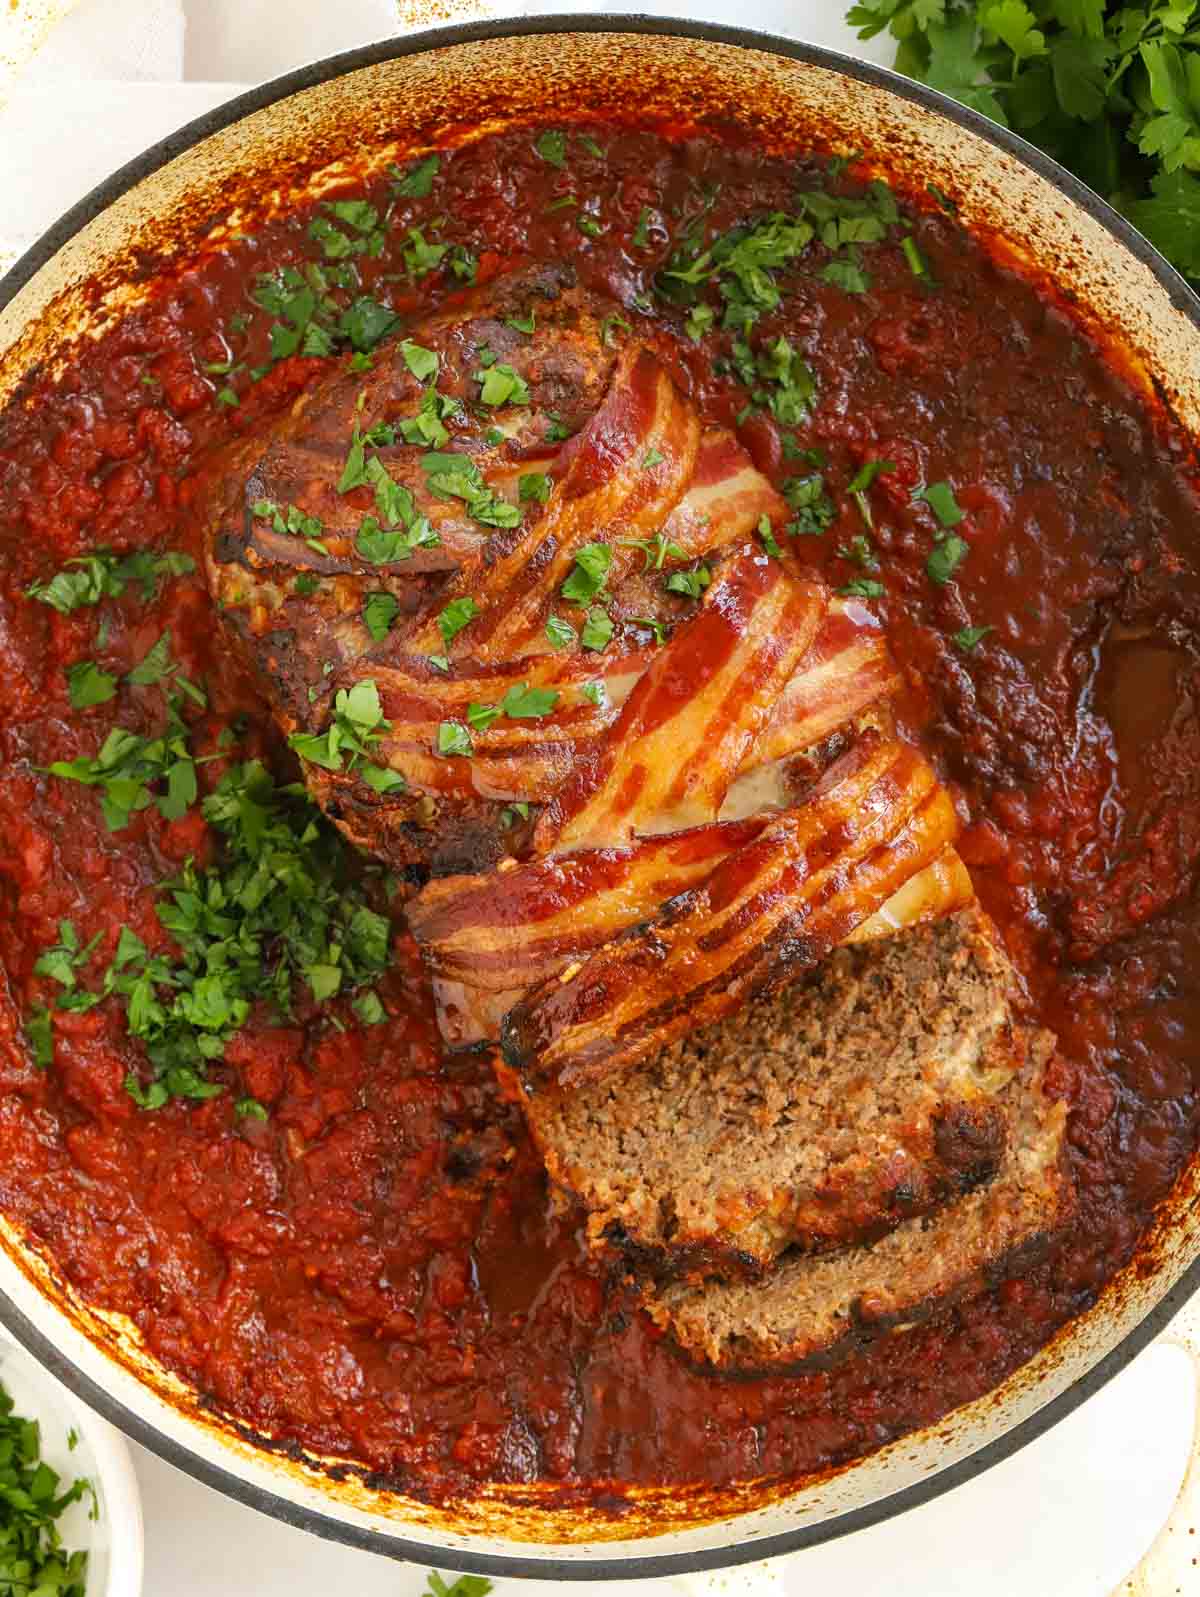 Pot filled with meatloaf in a sauce.